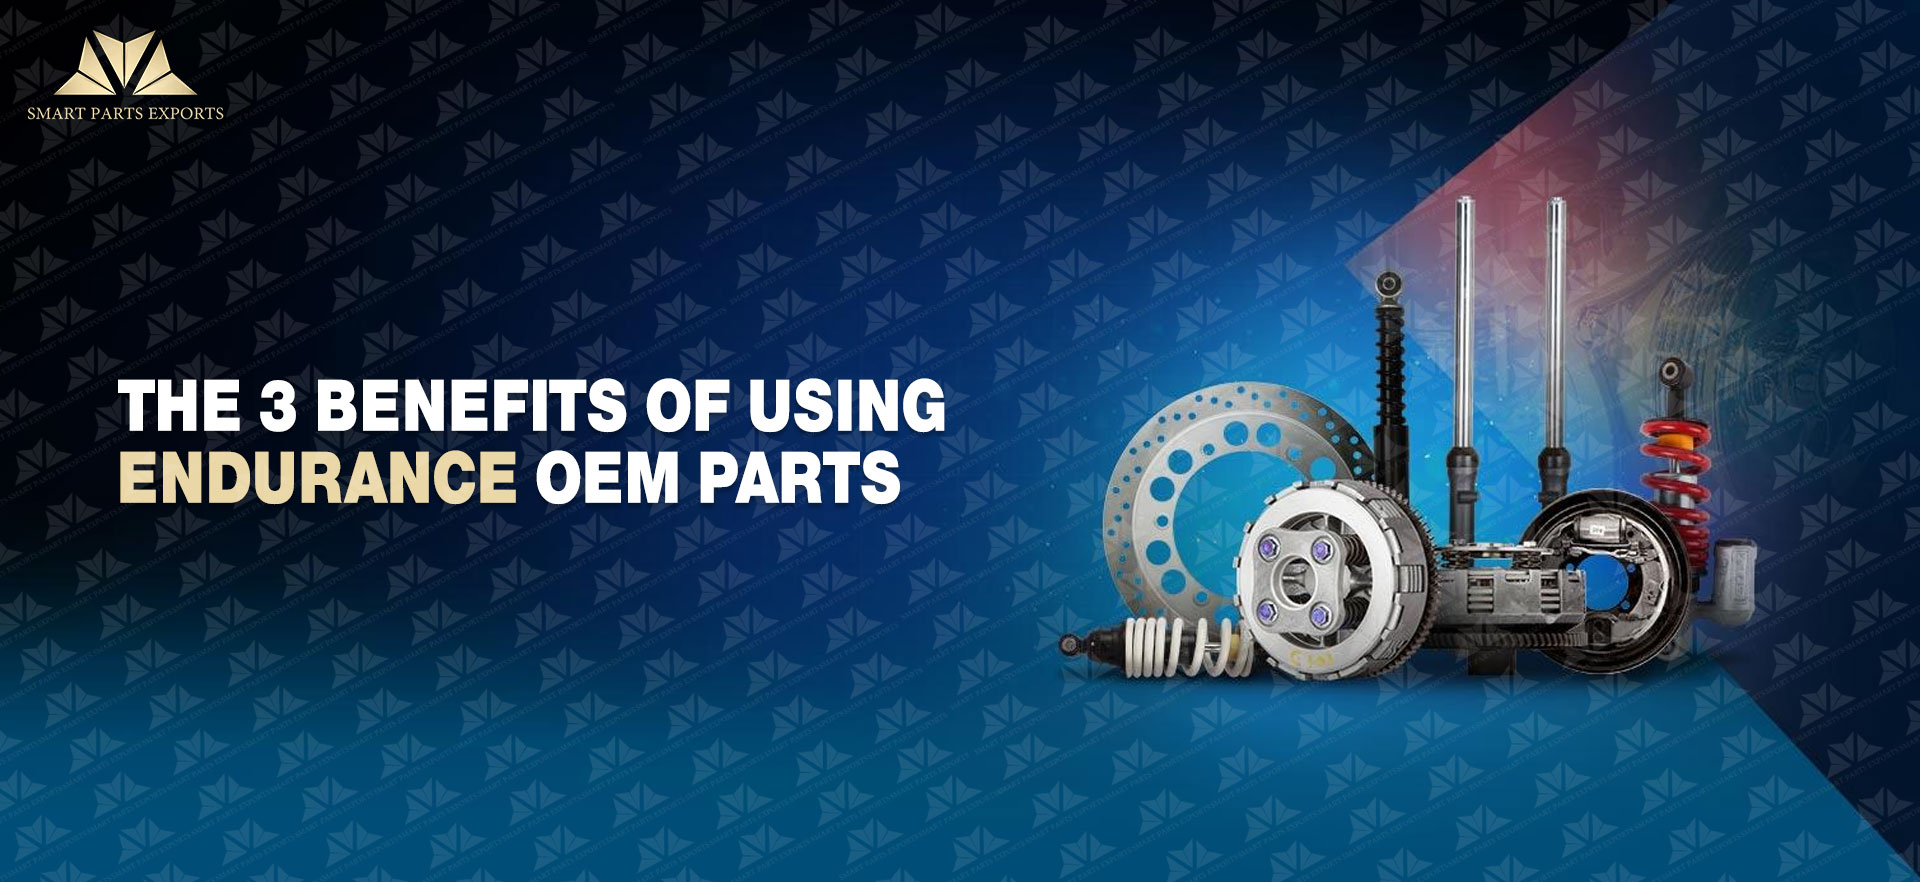 The 3 Benefits of Using Endurance Aftermarket Parts